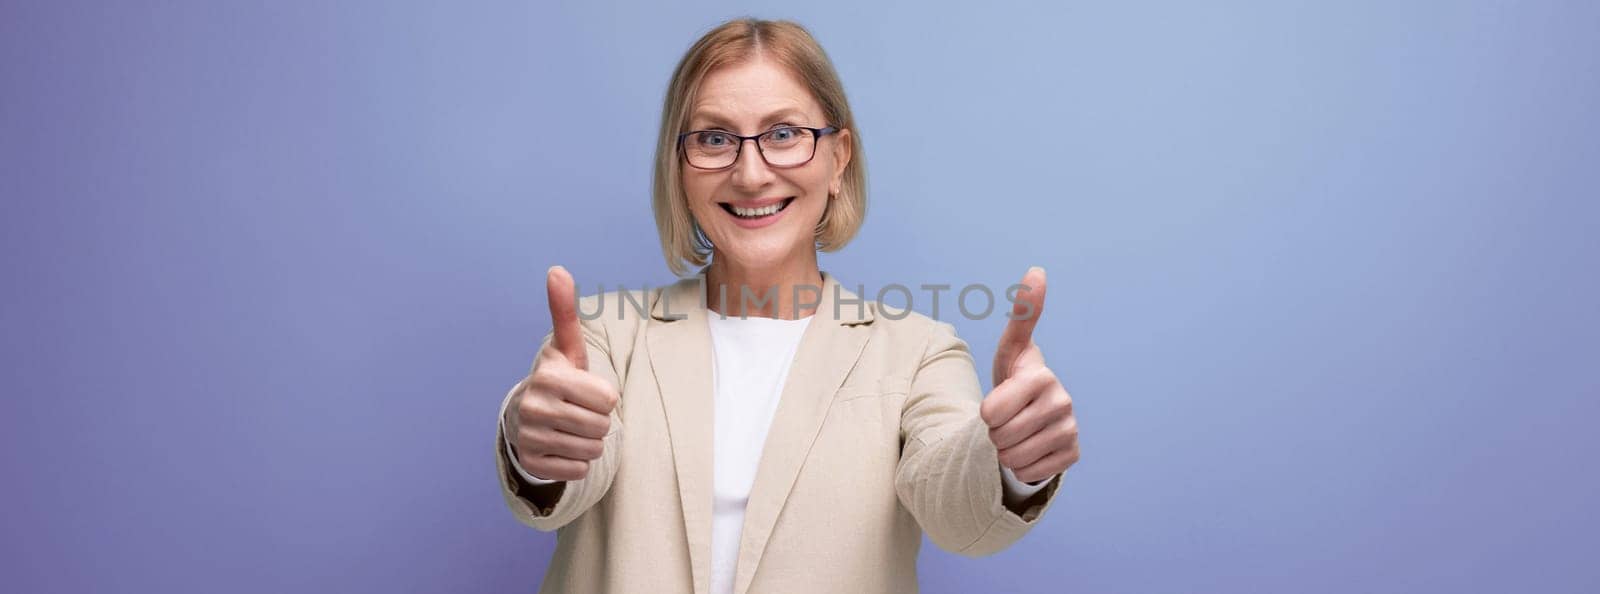 50s business woman in a stylish jacket on a bright studio background with copy space.